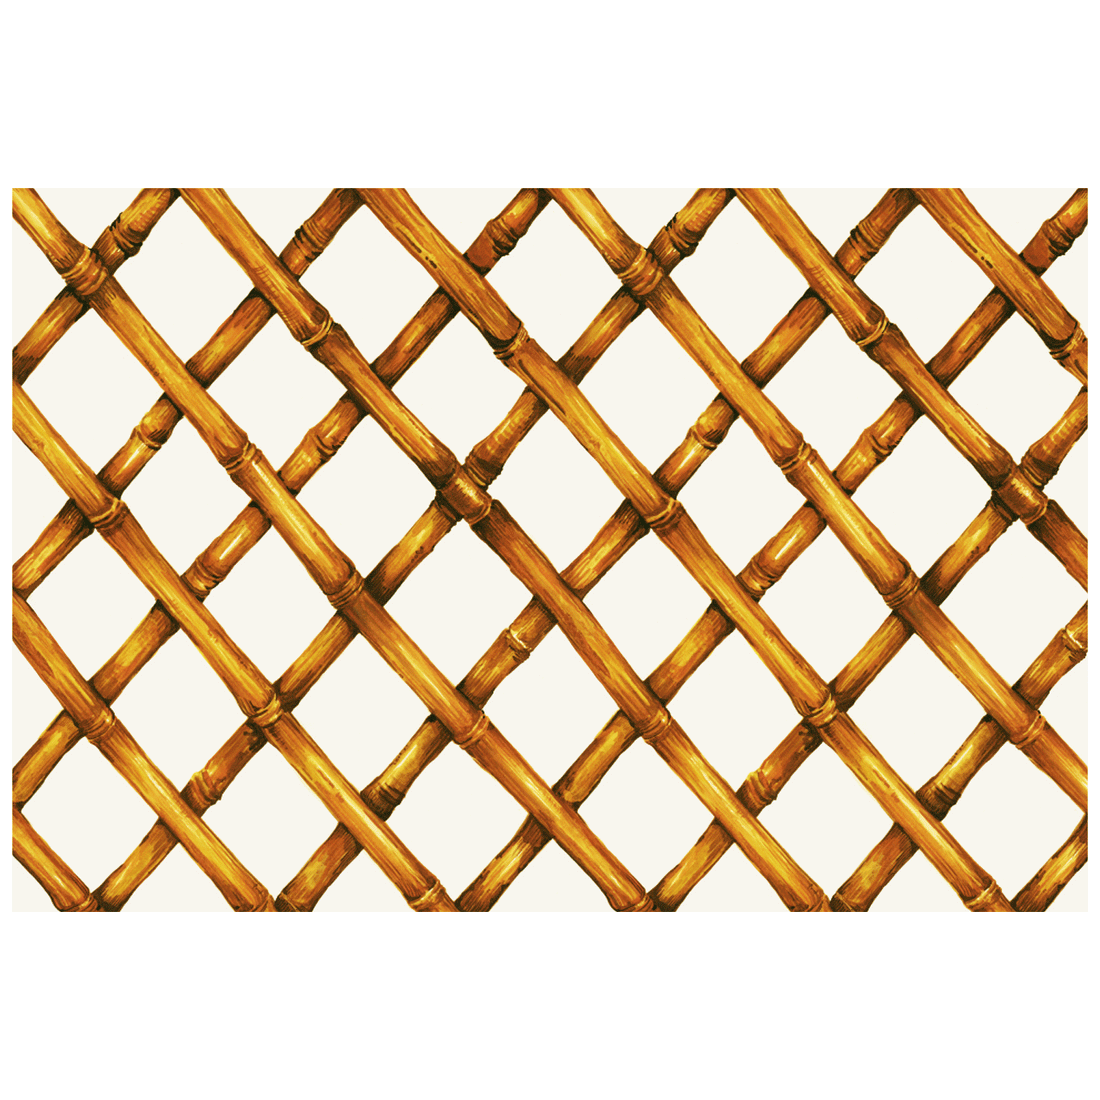 A diagonal woven bamboo pattern in dark tan on a white background.